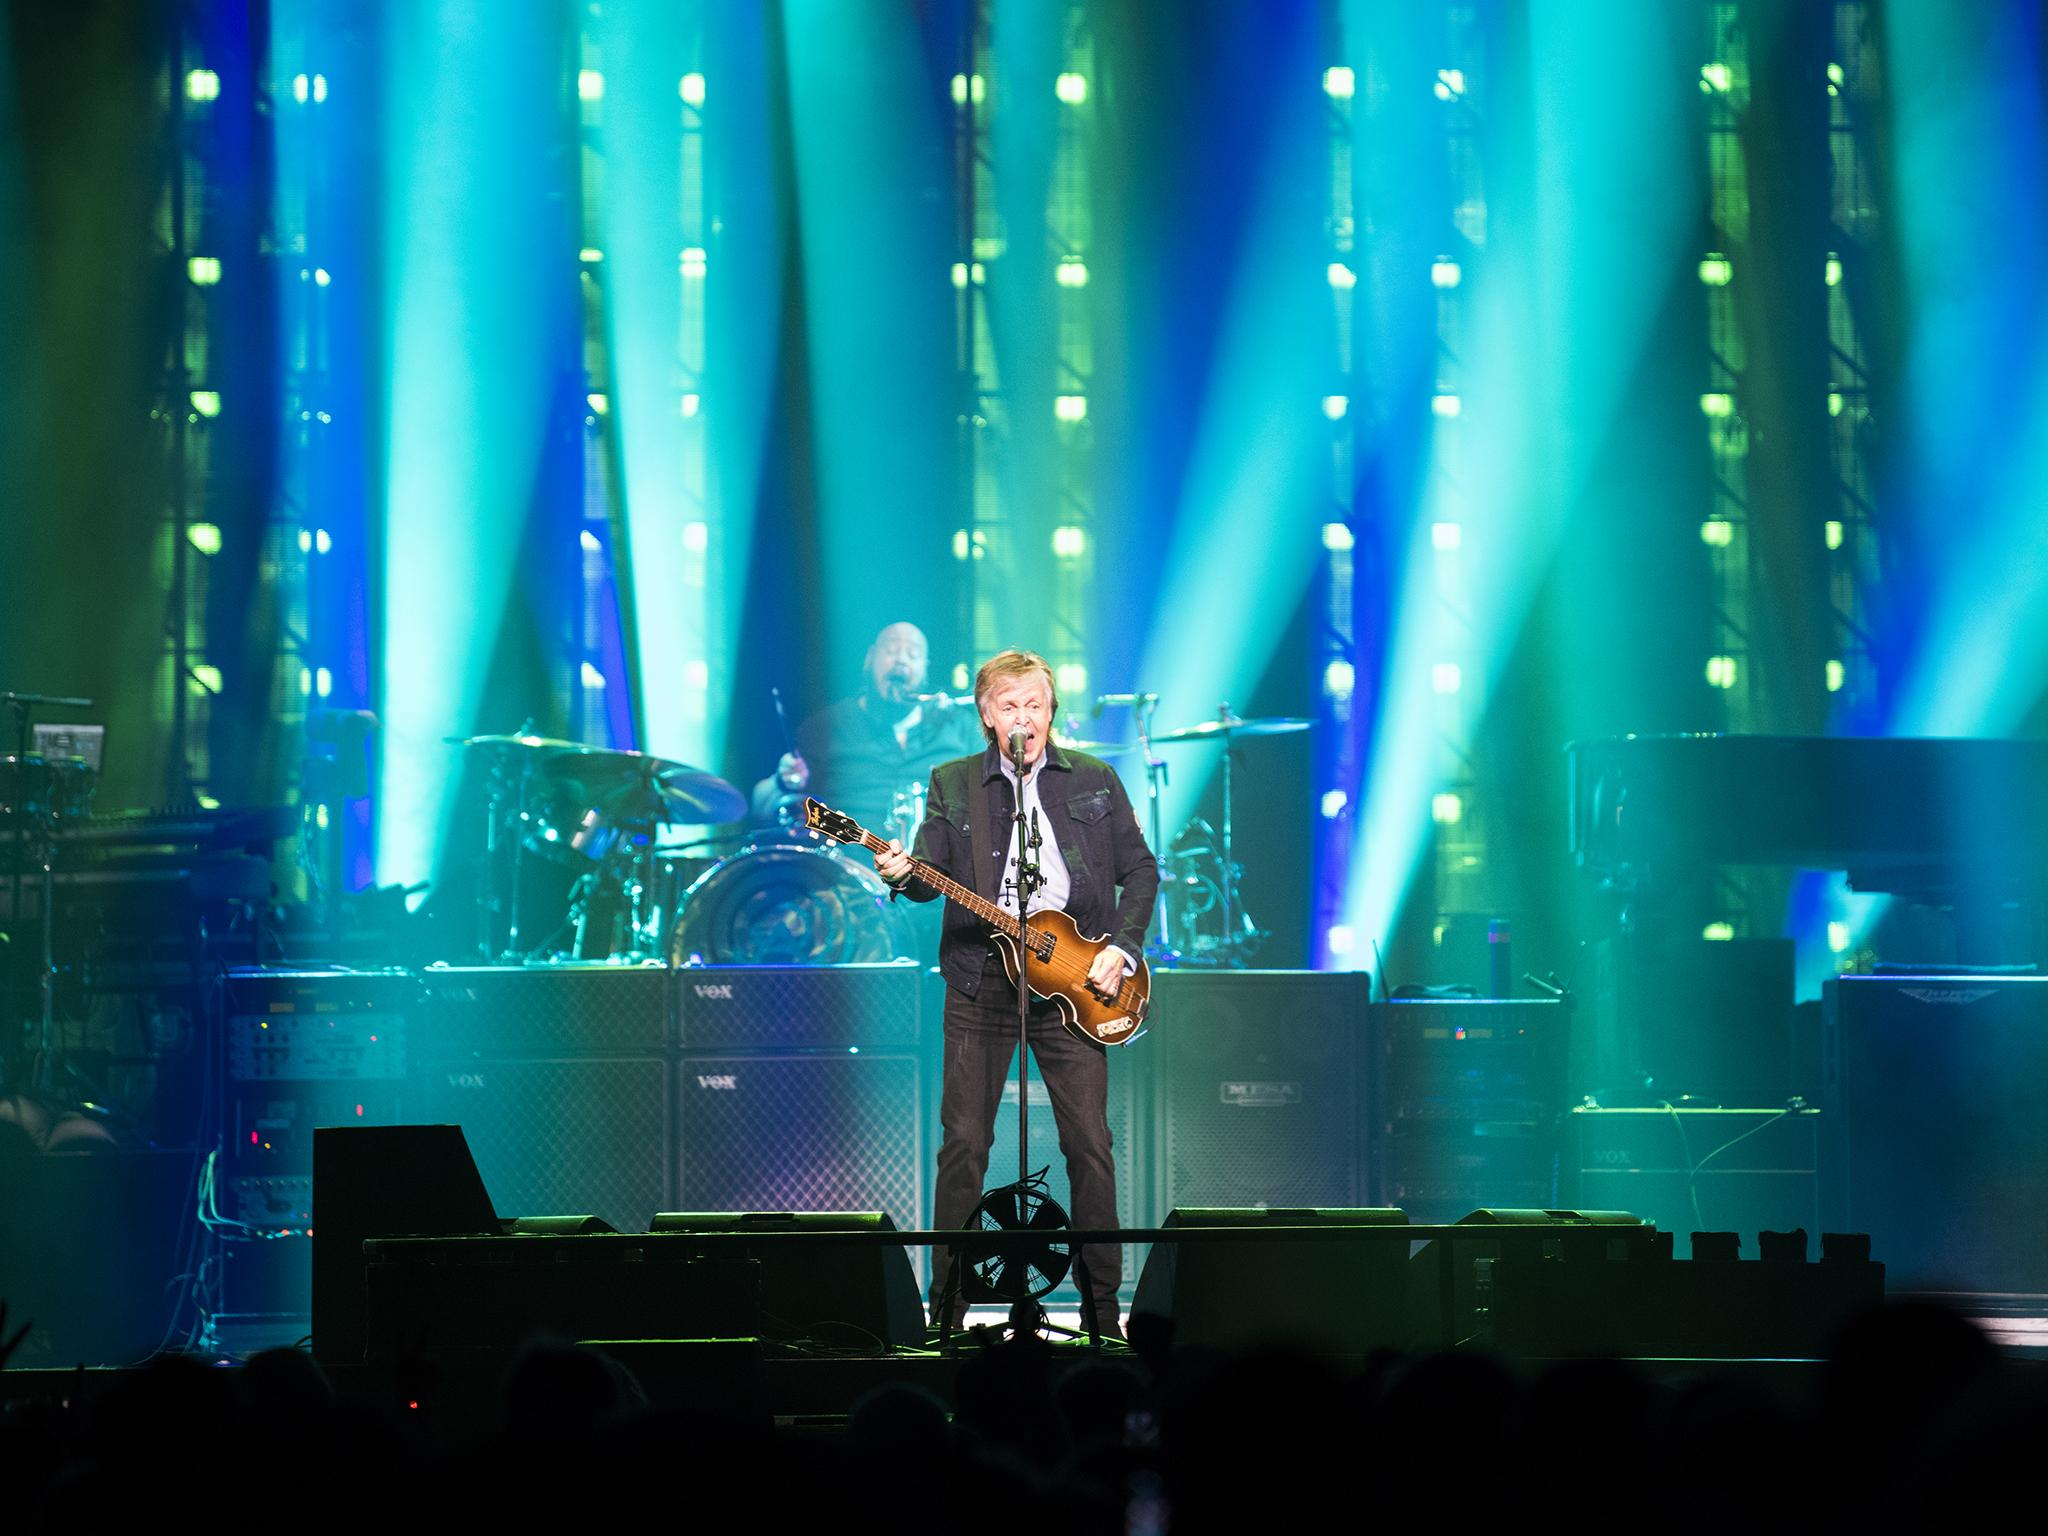 2048x1536 Paul McCartney at the O2 Arena, London &acirc;&#128;&#147; in pictures | The Independent | McCartney Times